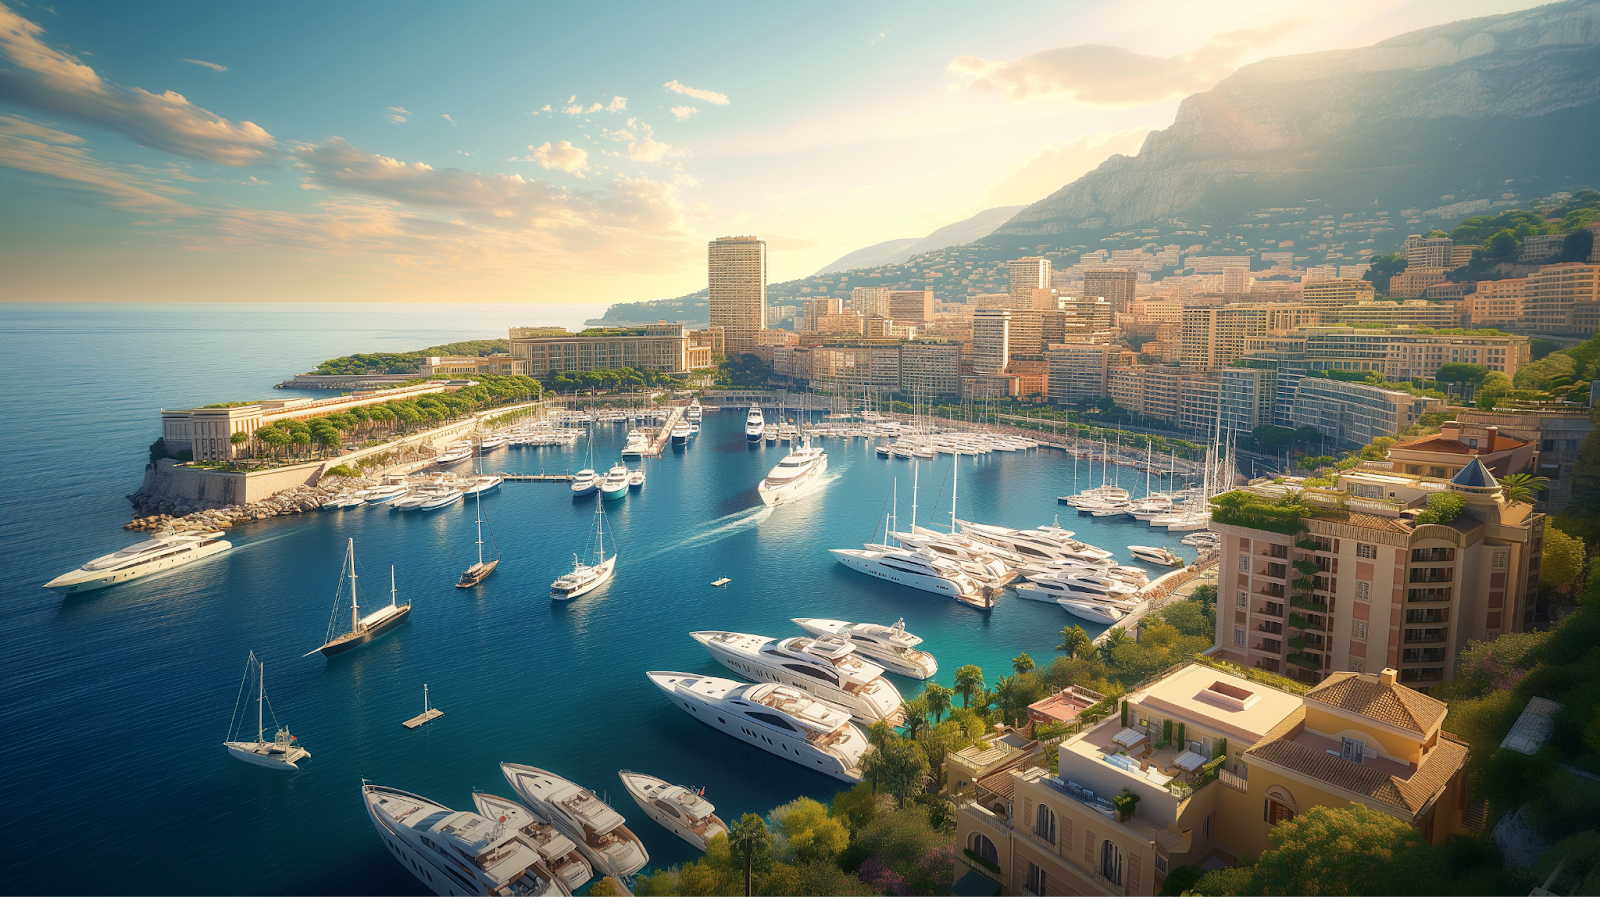 Monaco's luxurious marina filled with yachts.